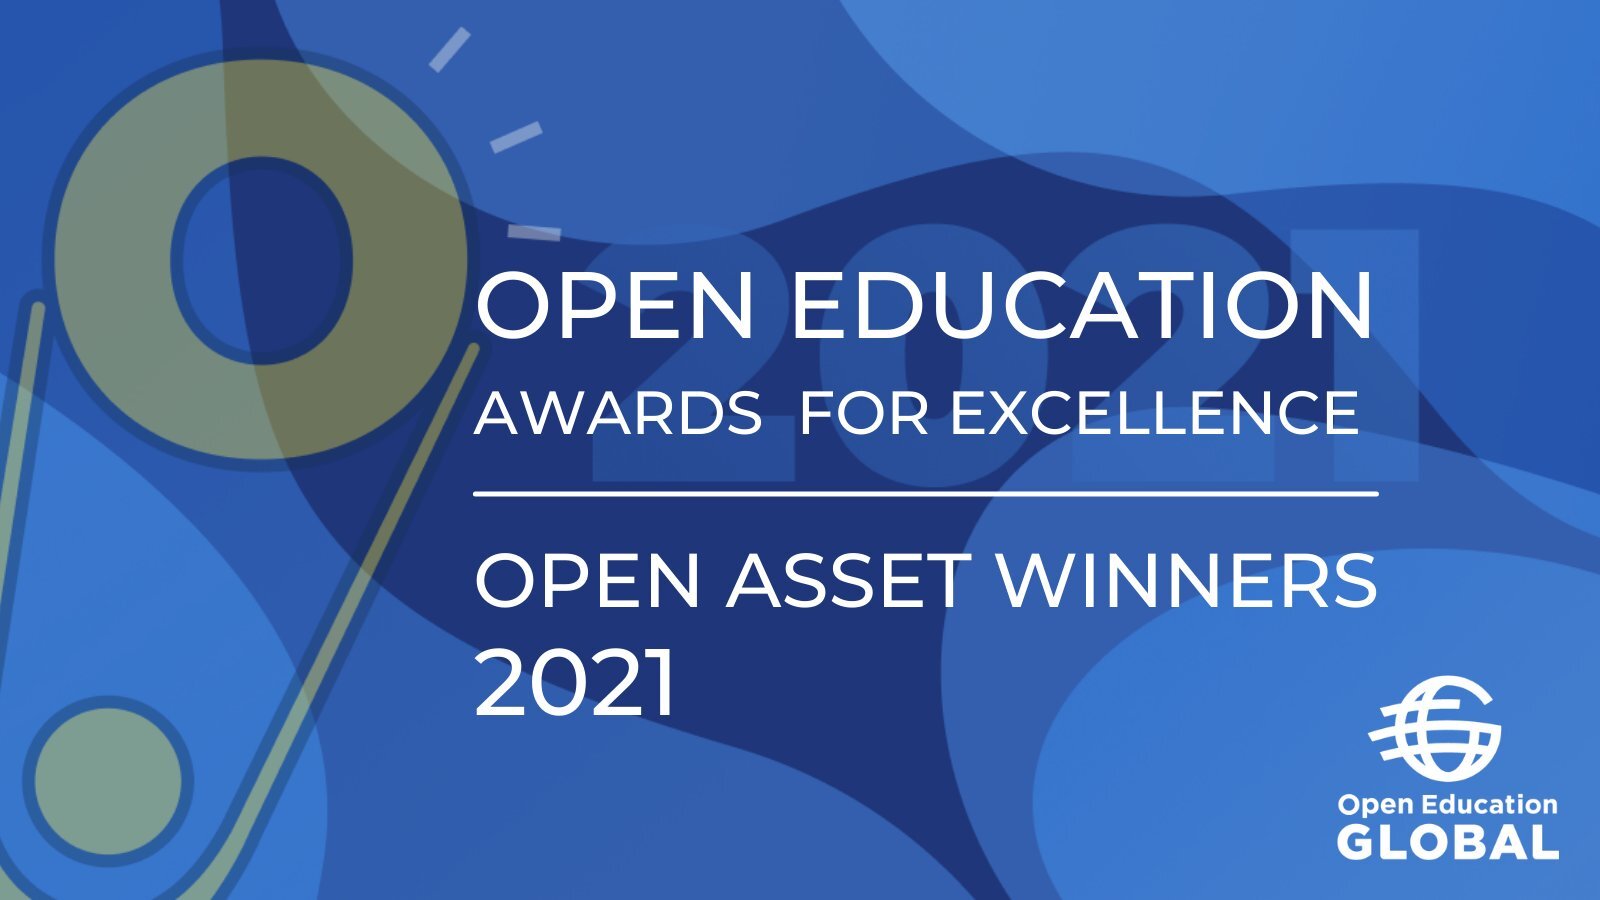 Open Education Global Awards Observatory IFE for Best Open Curation / Repository